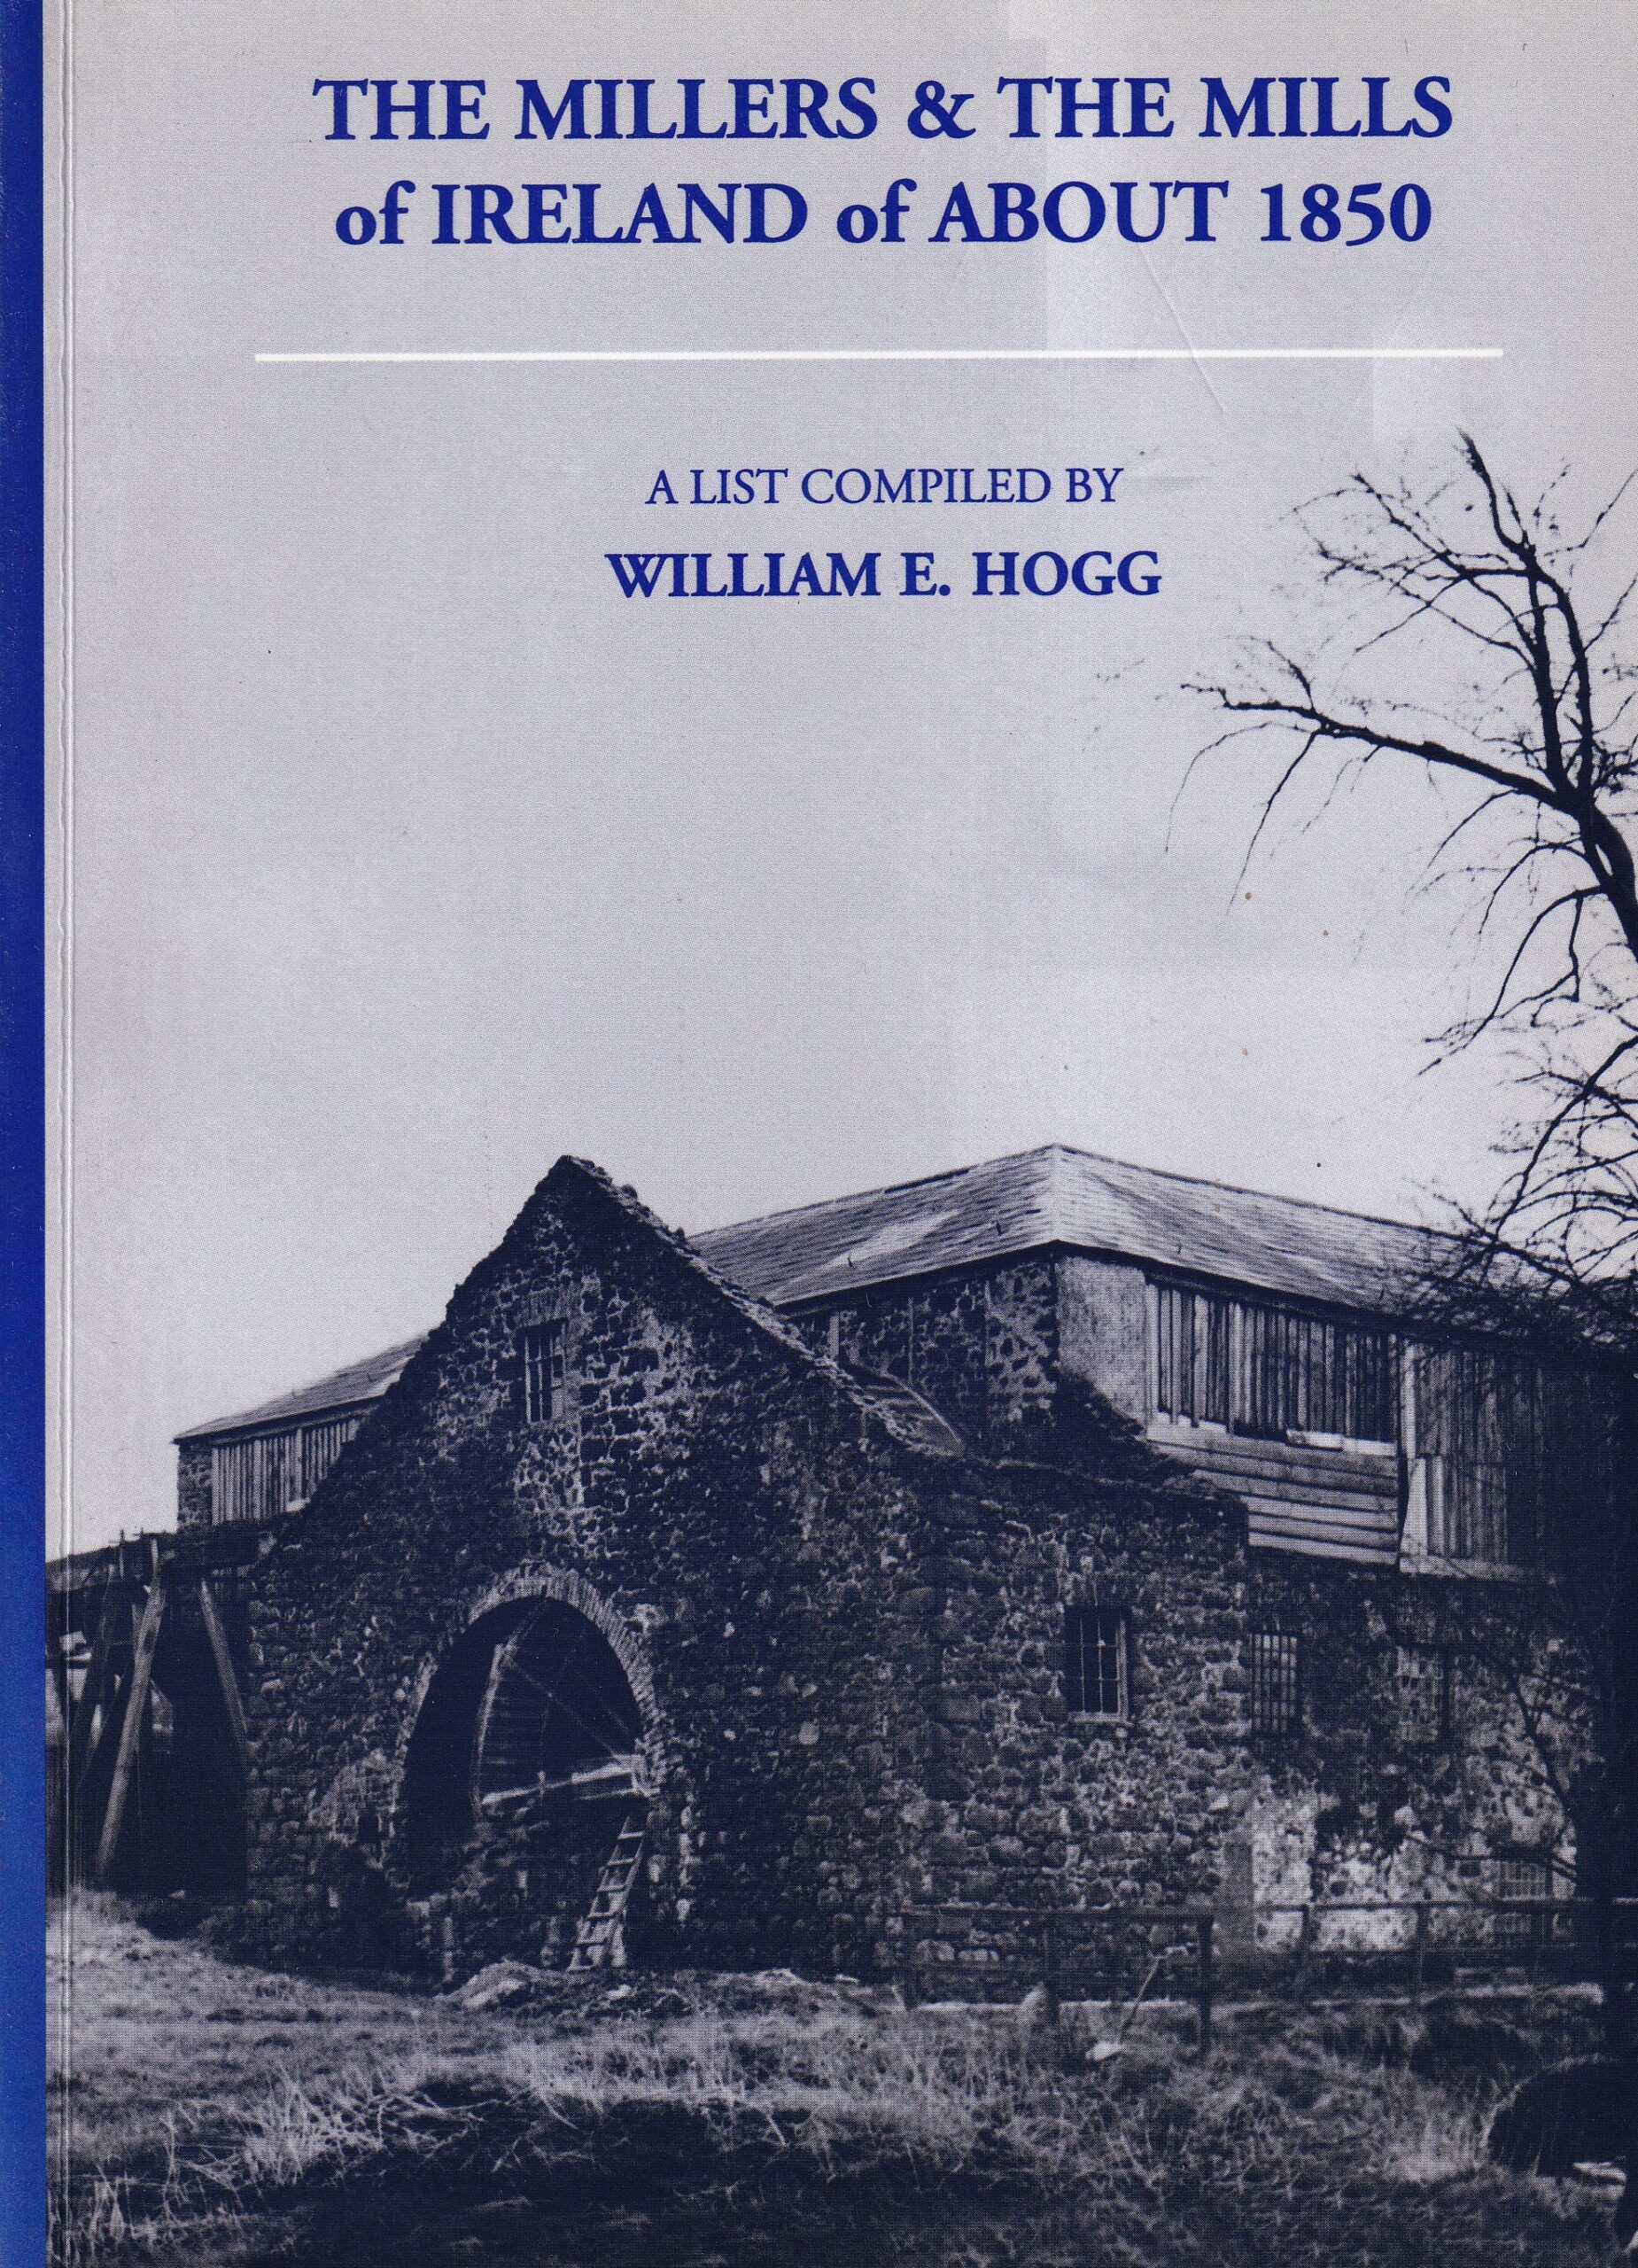 The Millers and the Mills of Ireland of about 1850: A List Compiled by William E. Hogg by William E. Hogg